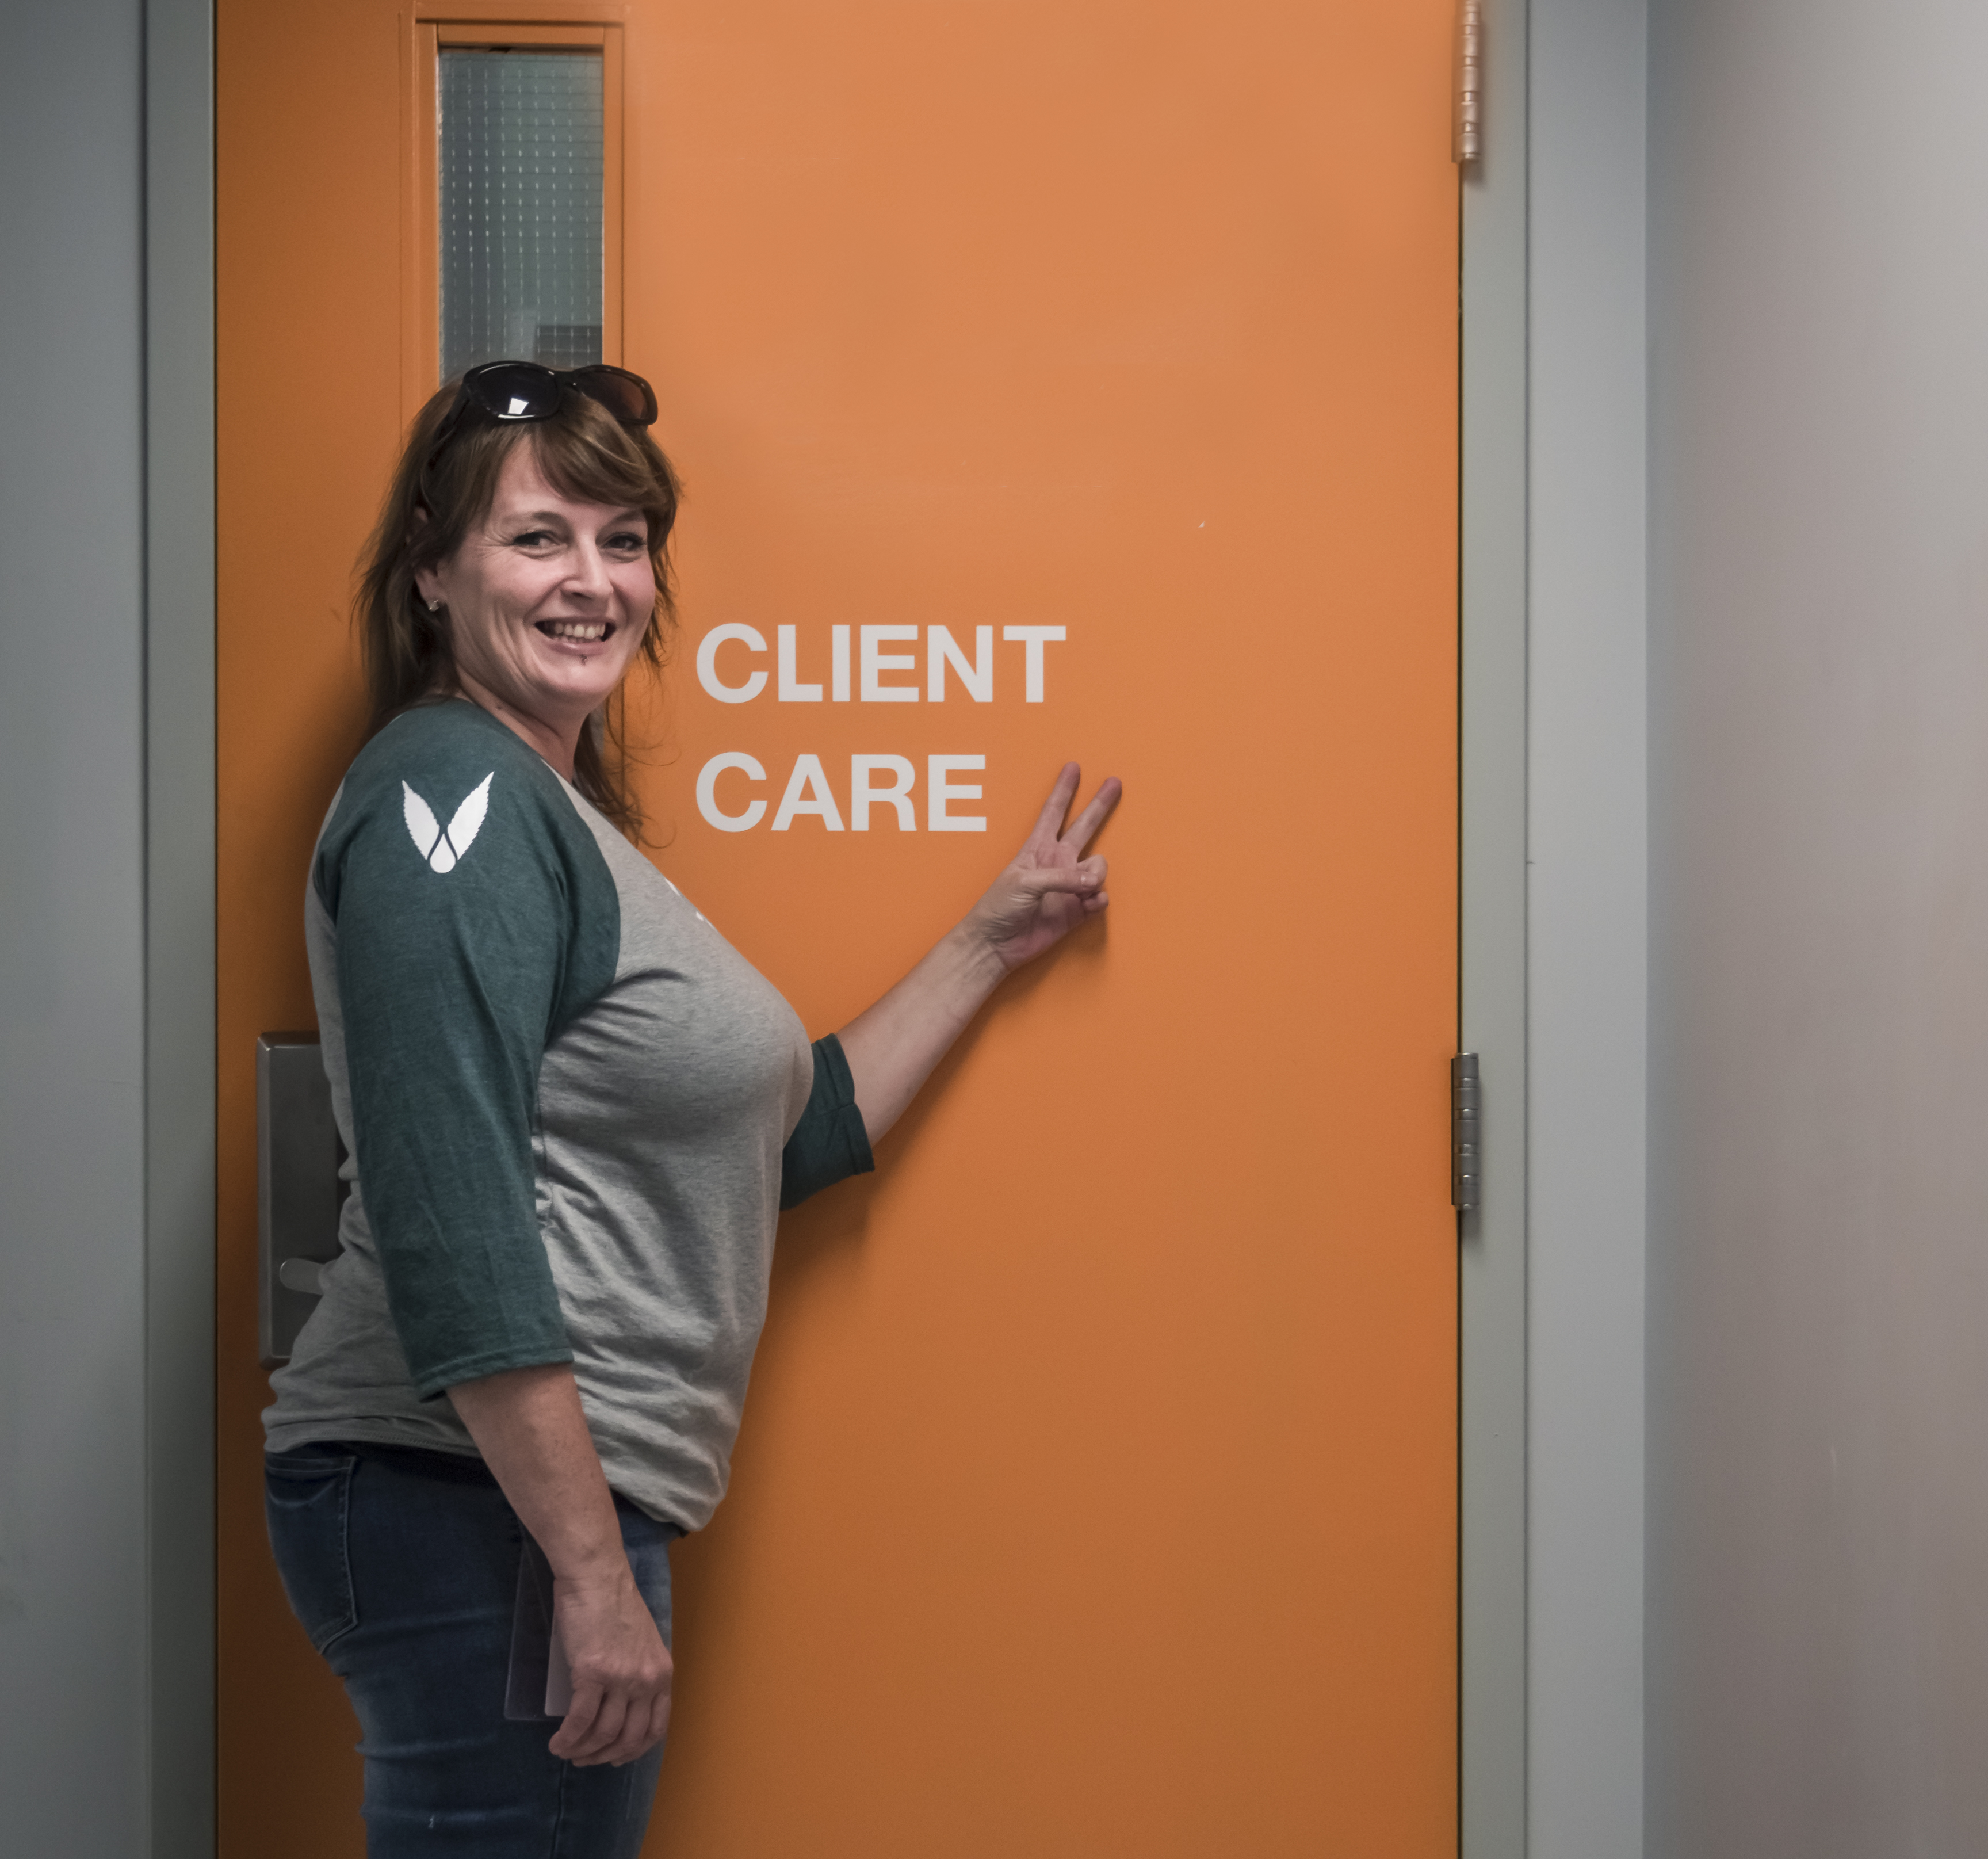 An image of the client care manager for an LP called INDIVA standing in front of a door labelled Client Care. 